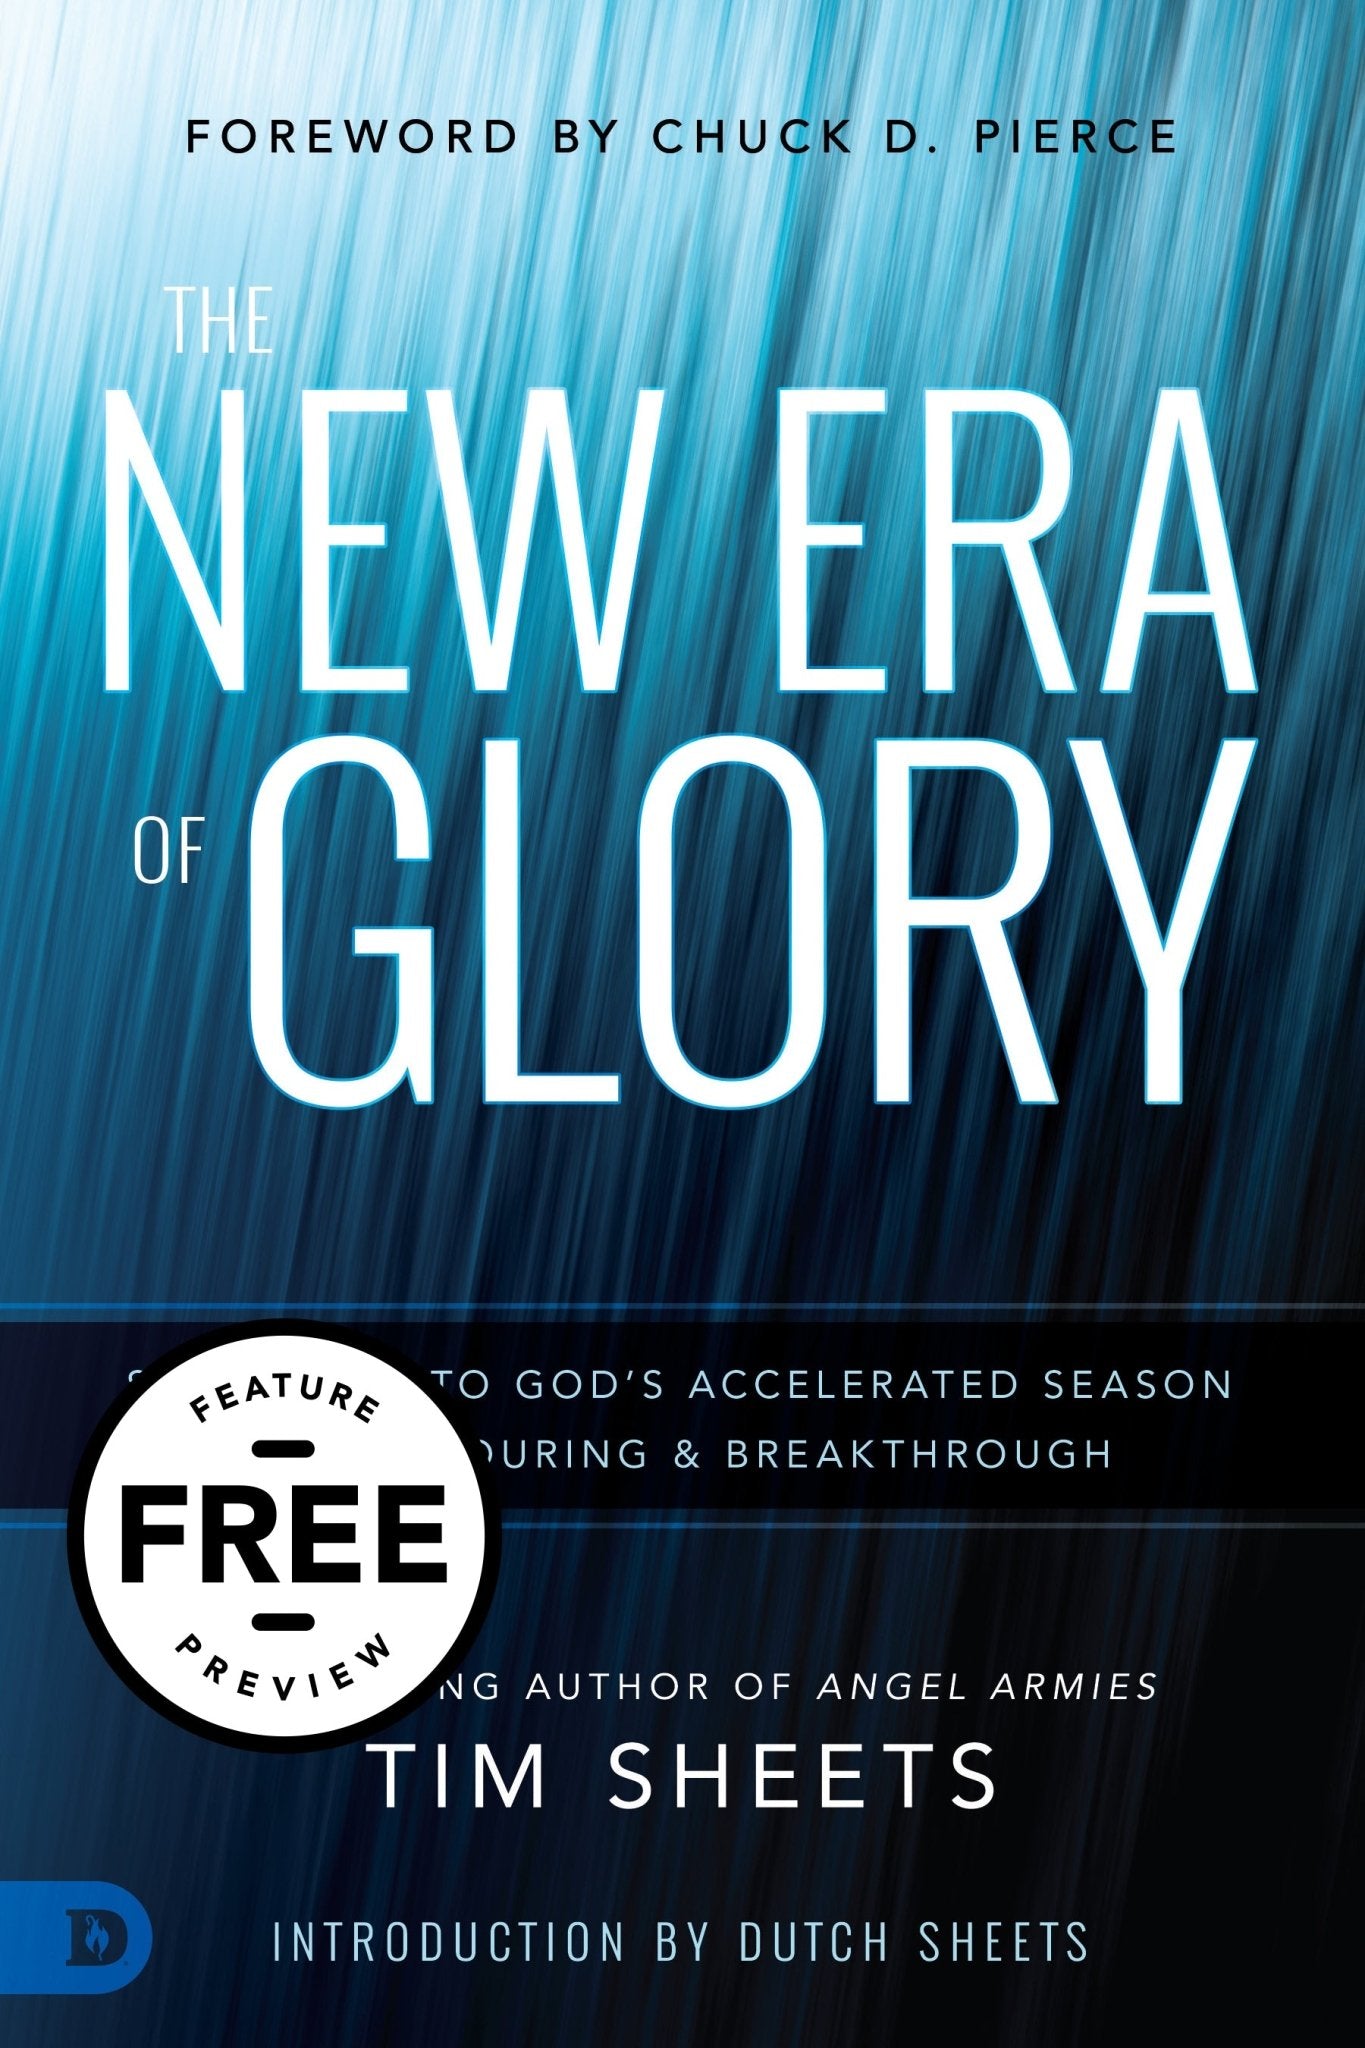 The New Era of Glory Free Feature Message (PDF Download)